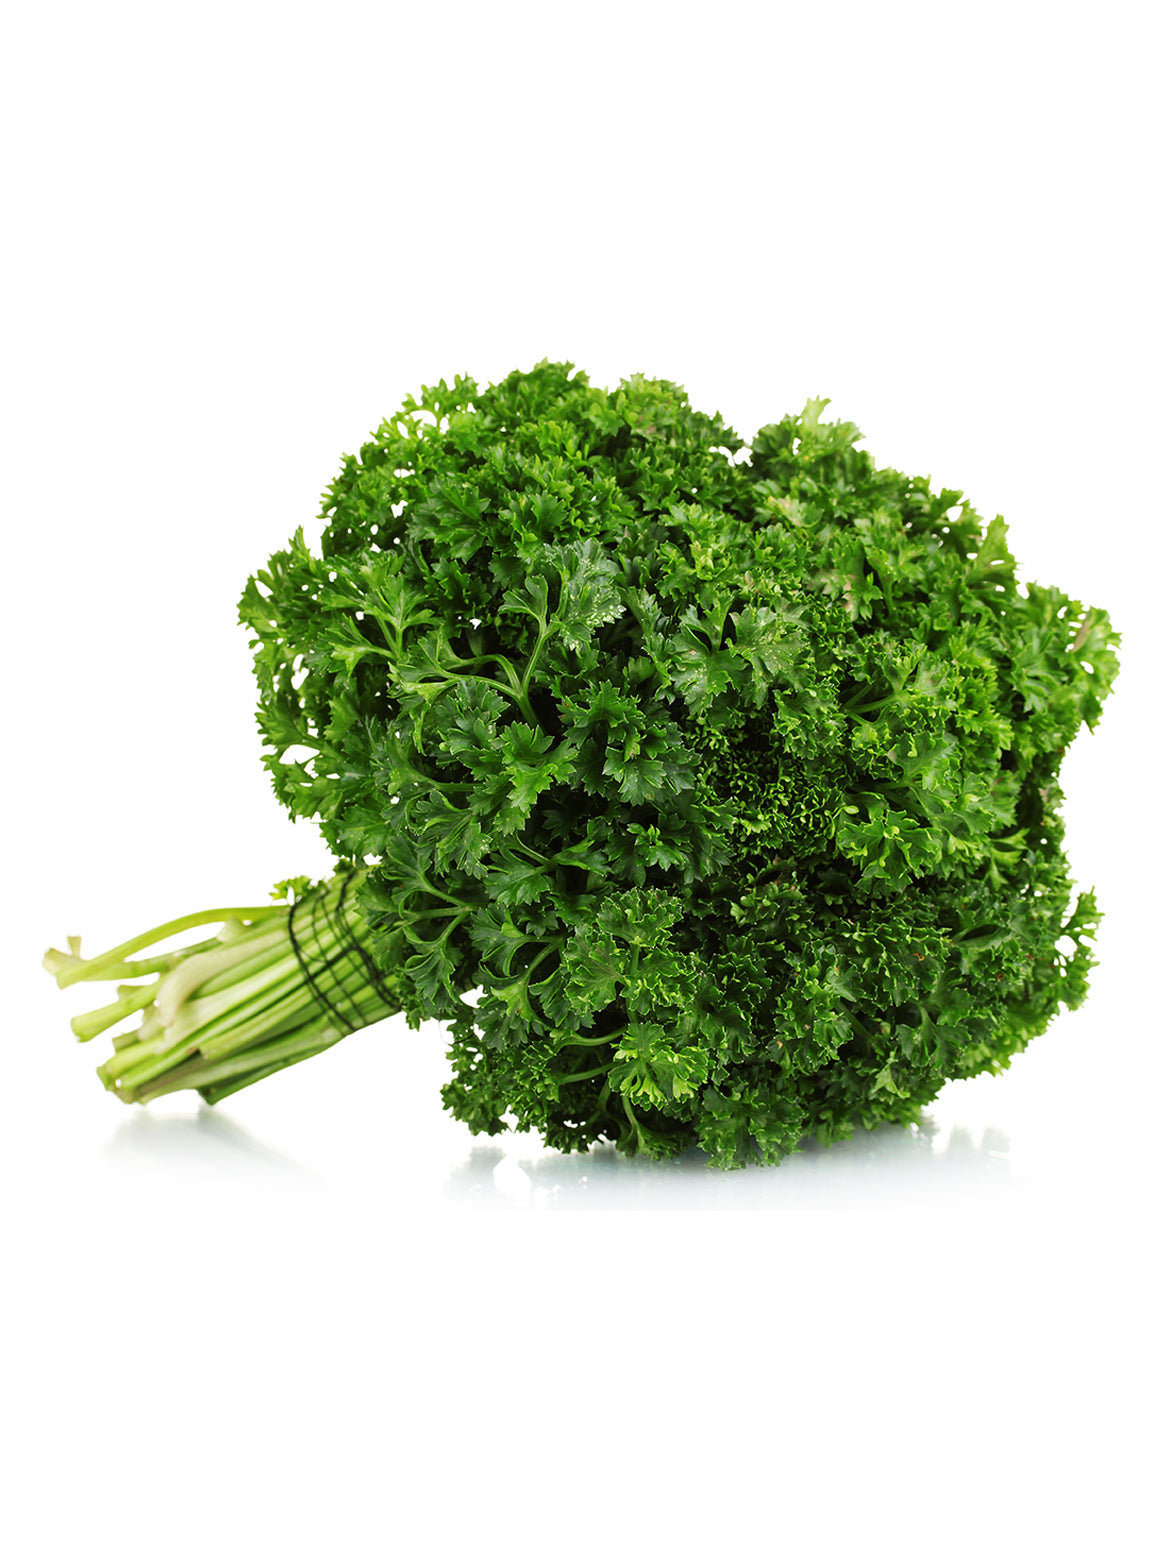 Parsley/Curly - Bunch